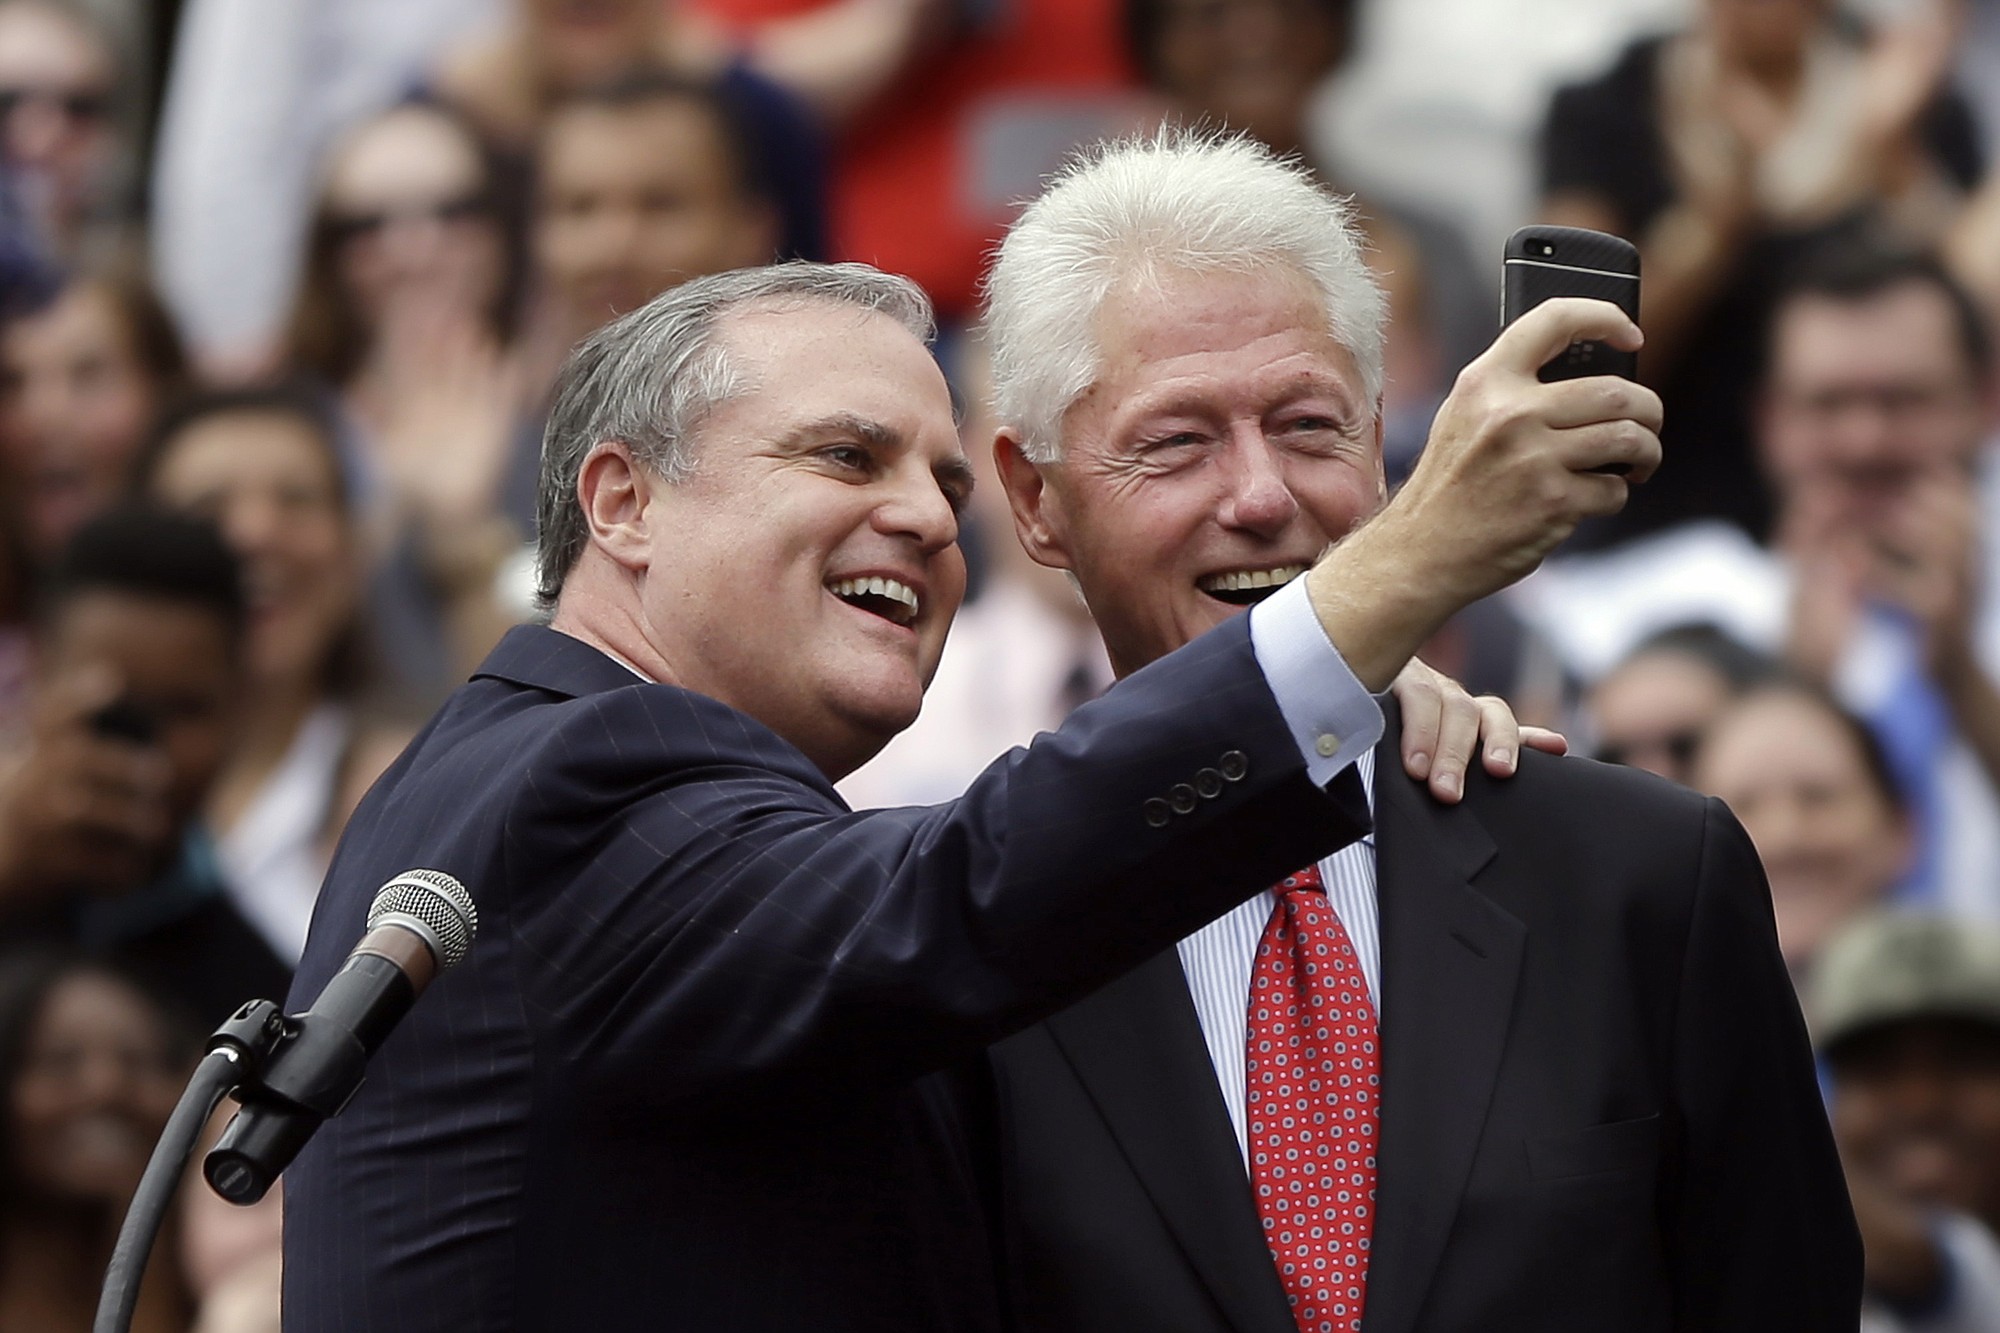 Sen. Mark Pryor, D-Ark., takes a selfie with former President Bill Clinton at a political rally Oct.